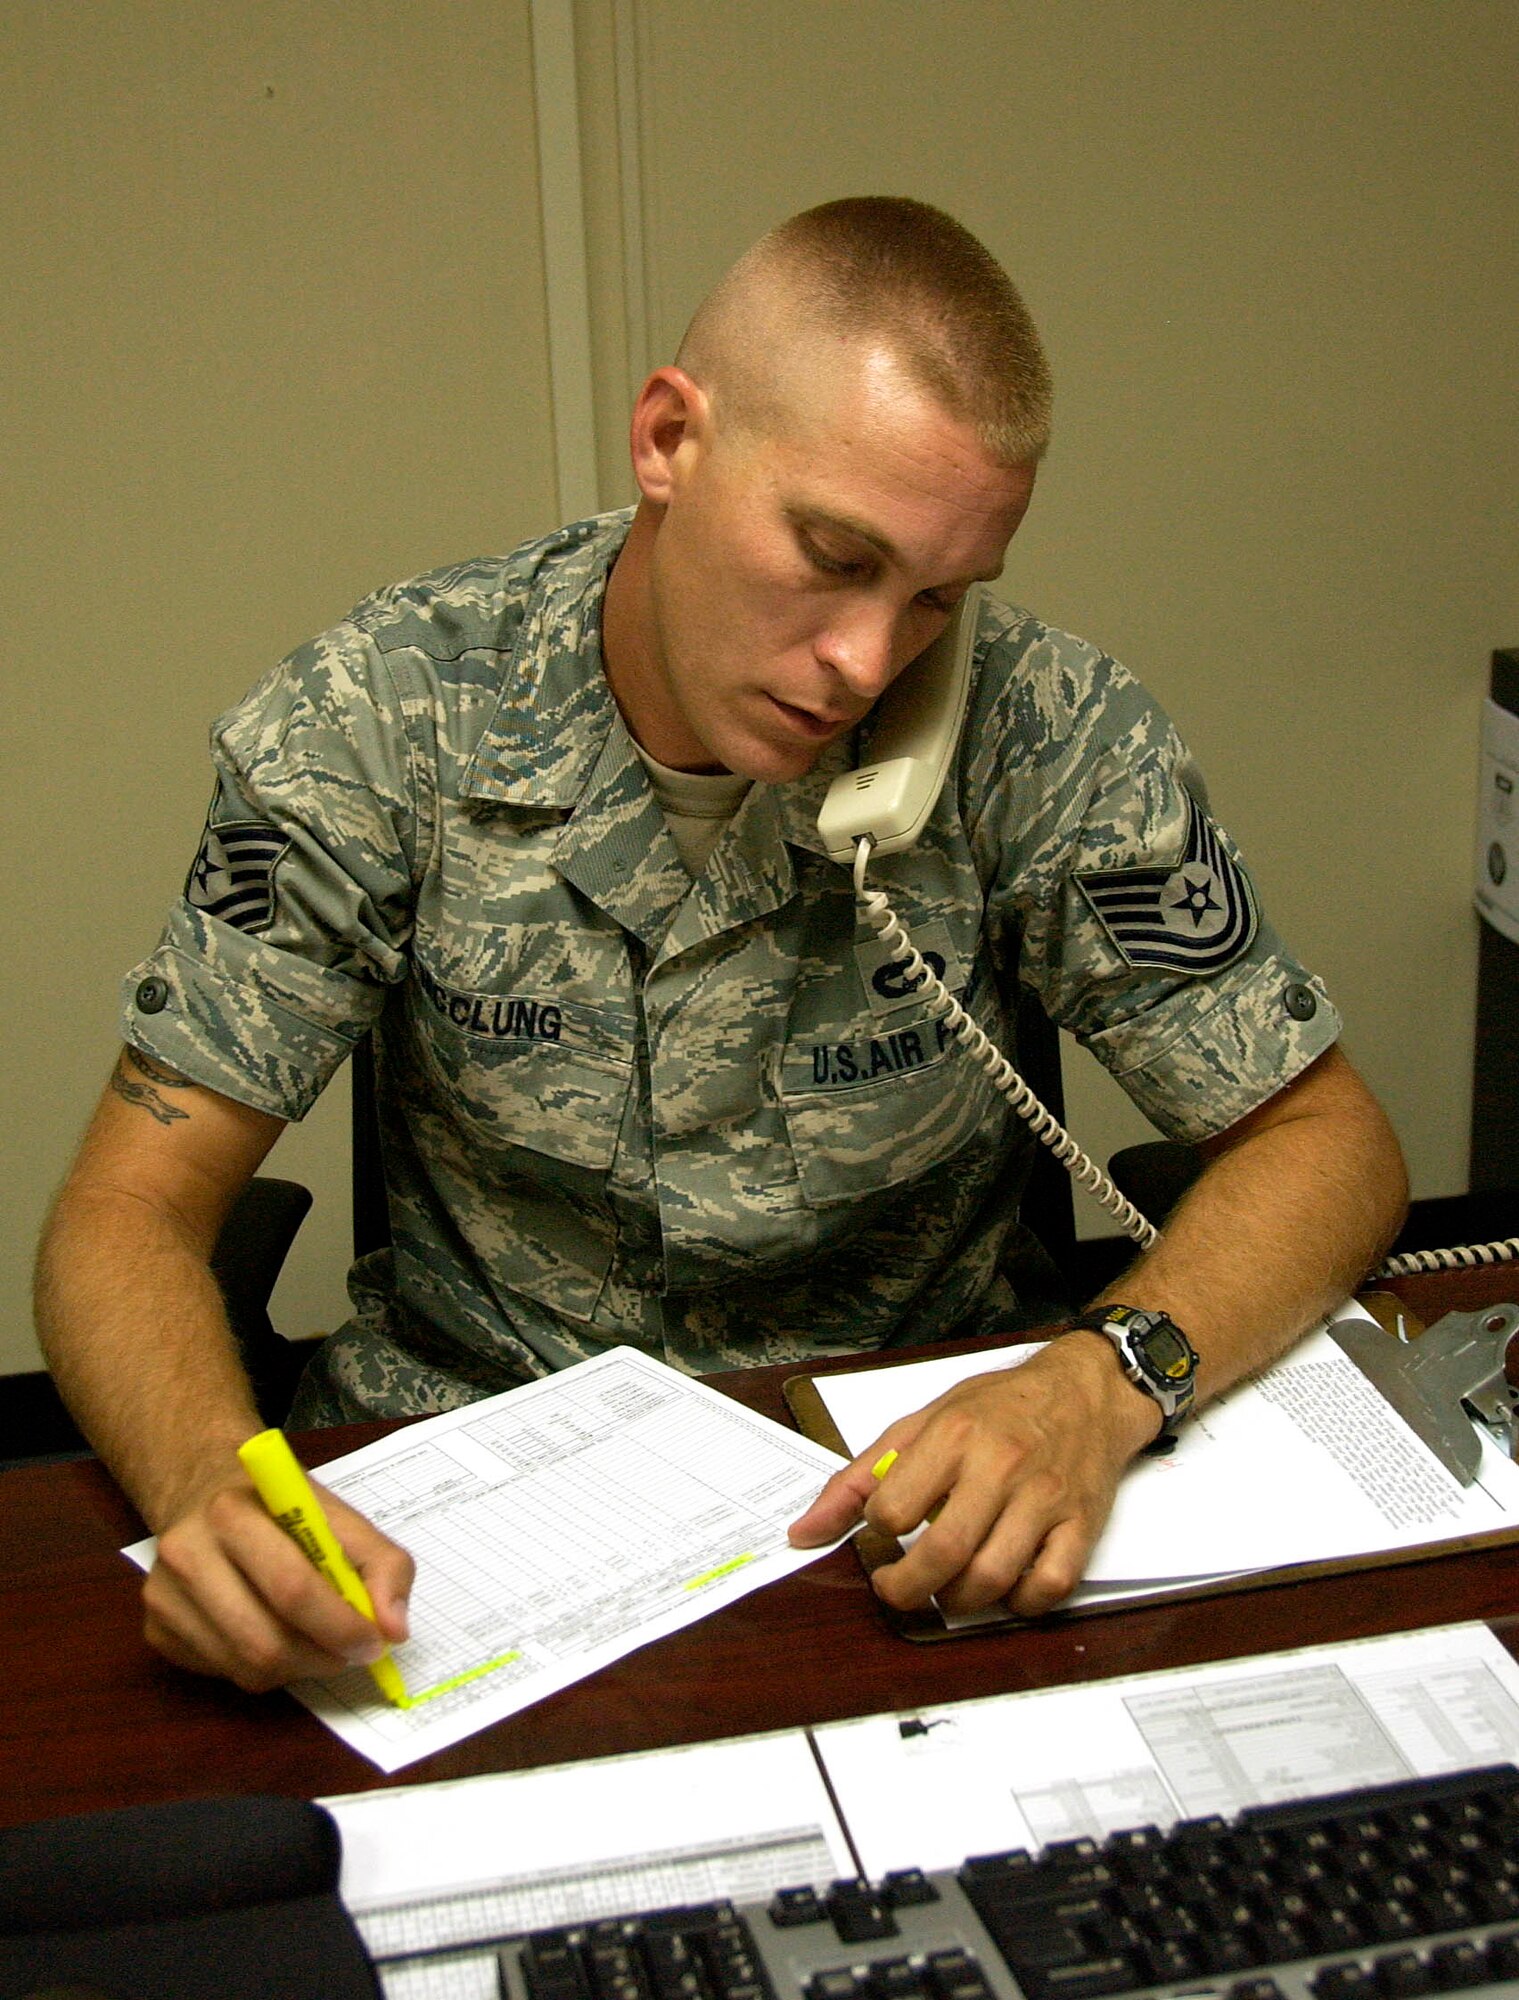 ANDERSEN AIR FORCE BASE, Guam -- Tech. Sgt. Lewis McClung, 734th Air Mobility Squadron noncommissioned officer in charge of air terminal operations center, coordinates the explosive movement of cargo and inspection of that cargo May 12. Sergeant McClung coordinates for aircraft, crew members and cargo. He ensures all inbound and outbound personnel are accommodated while on Andersen, all cargo and passengers are loaded correctly and all aircraft are safe and ready for flight. (U.S. Air Force photo by Airman Carissa Wolff) 